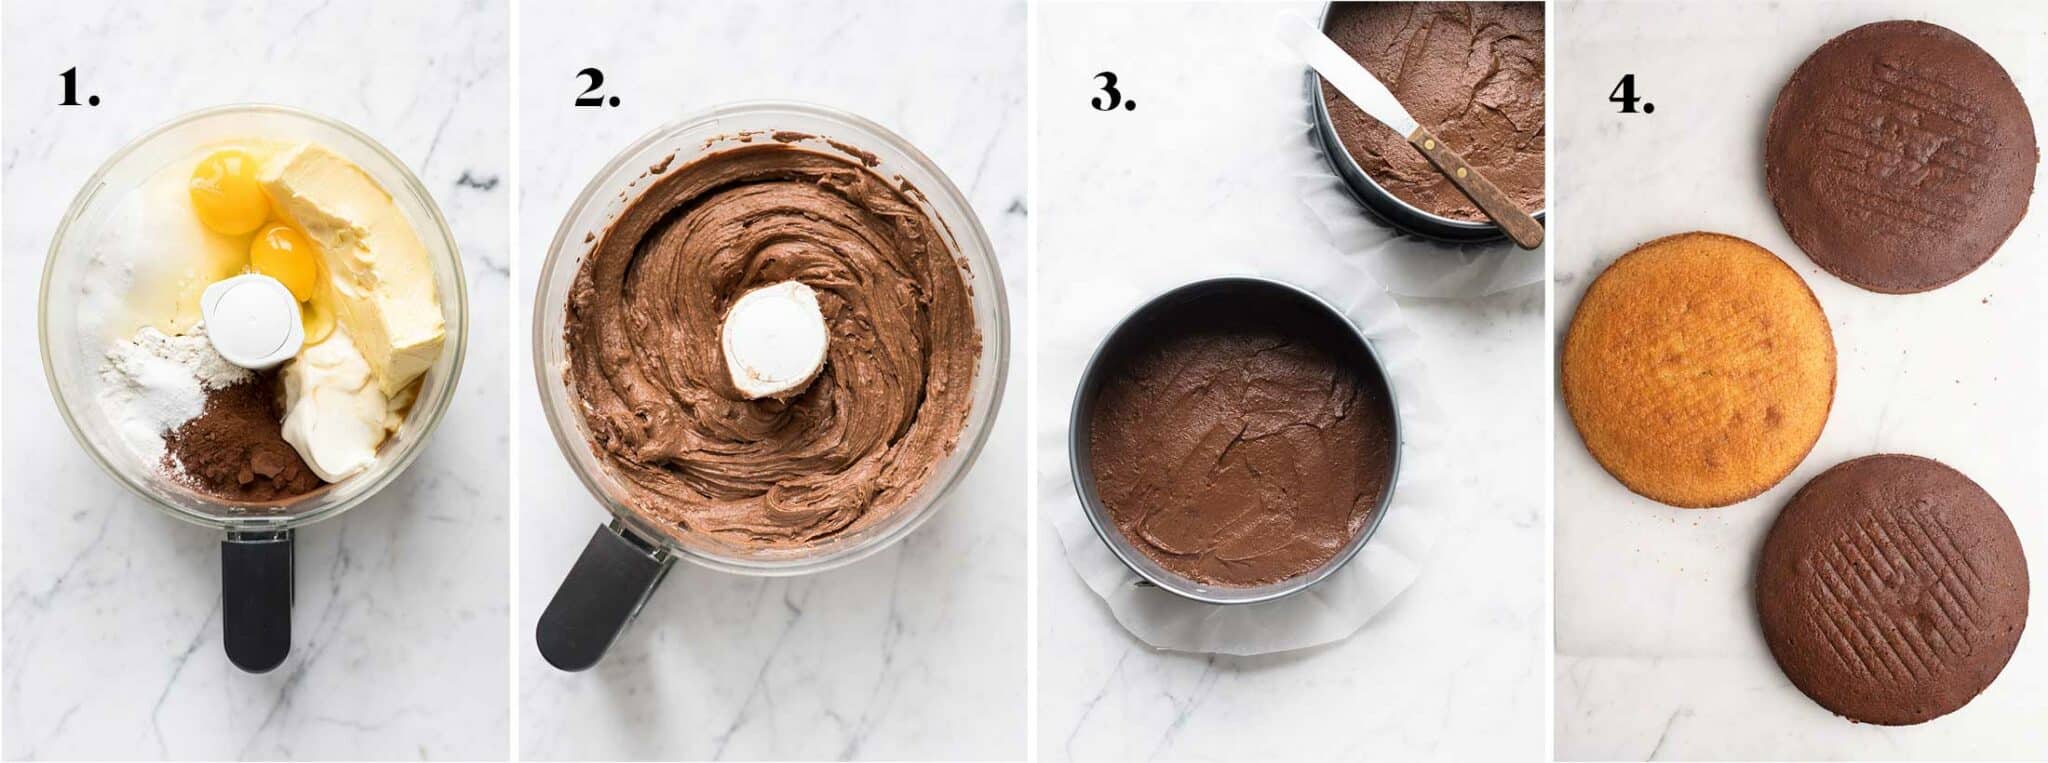 how to make chocolate cakes in food processor